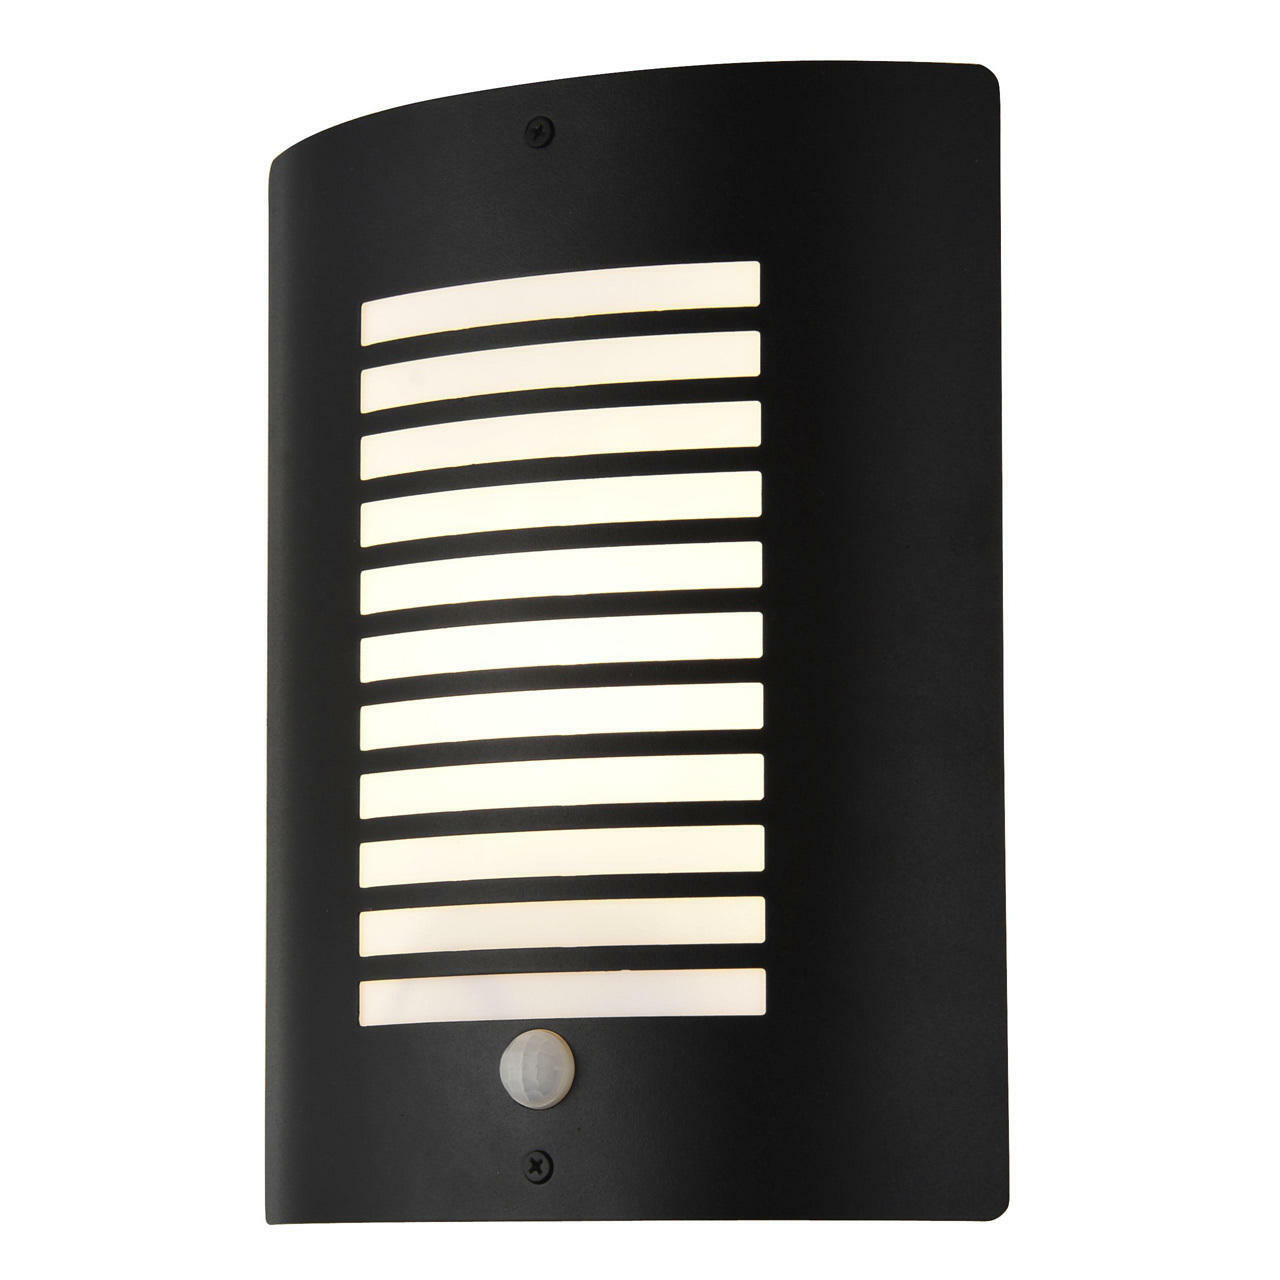 Photos - Chandelier / Lamp Zink SIGMA Outdoor Slatted Wall Lantern with PIR Black ZN-28708-BLK